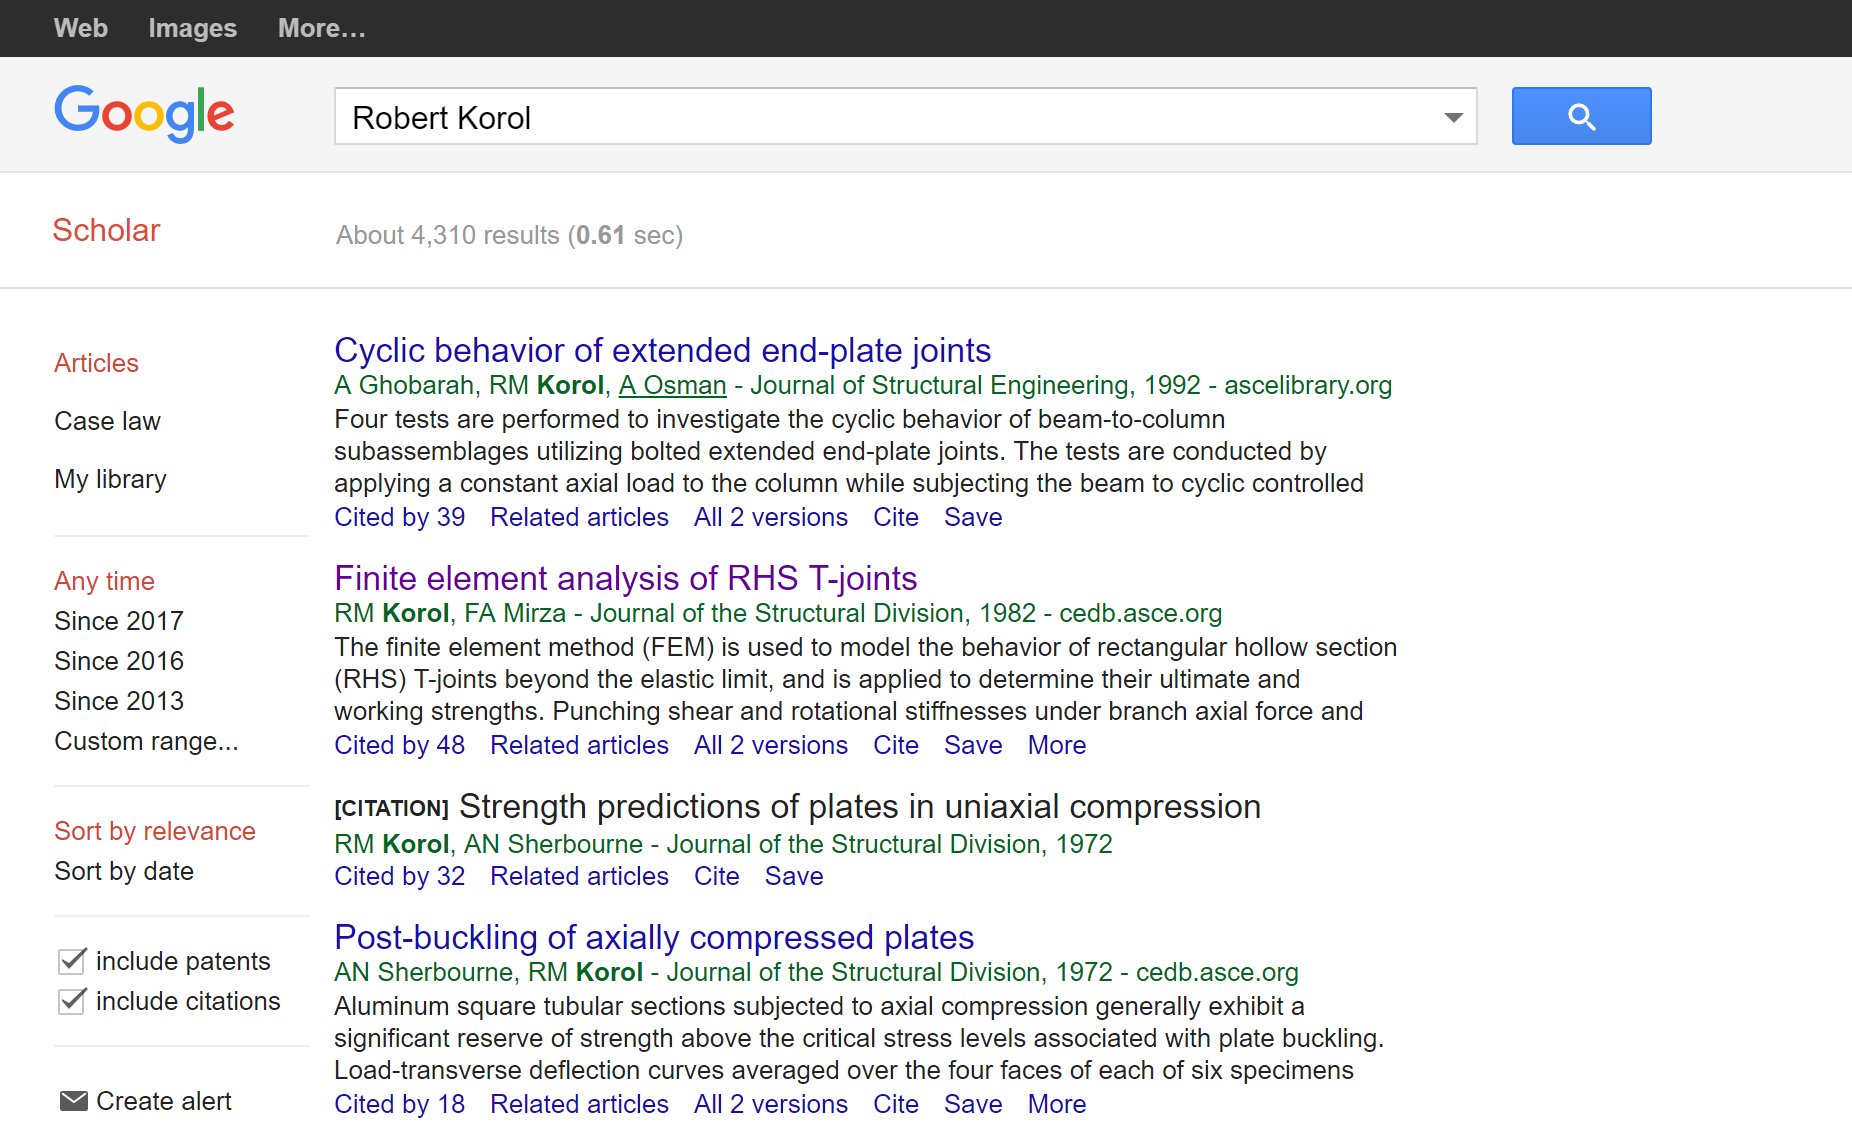 The Google Scholar search results for “Robert Korol,” who appears to have published architectural research in the 1970s, 80s, and 90s.